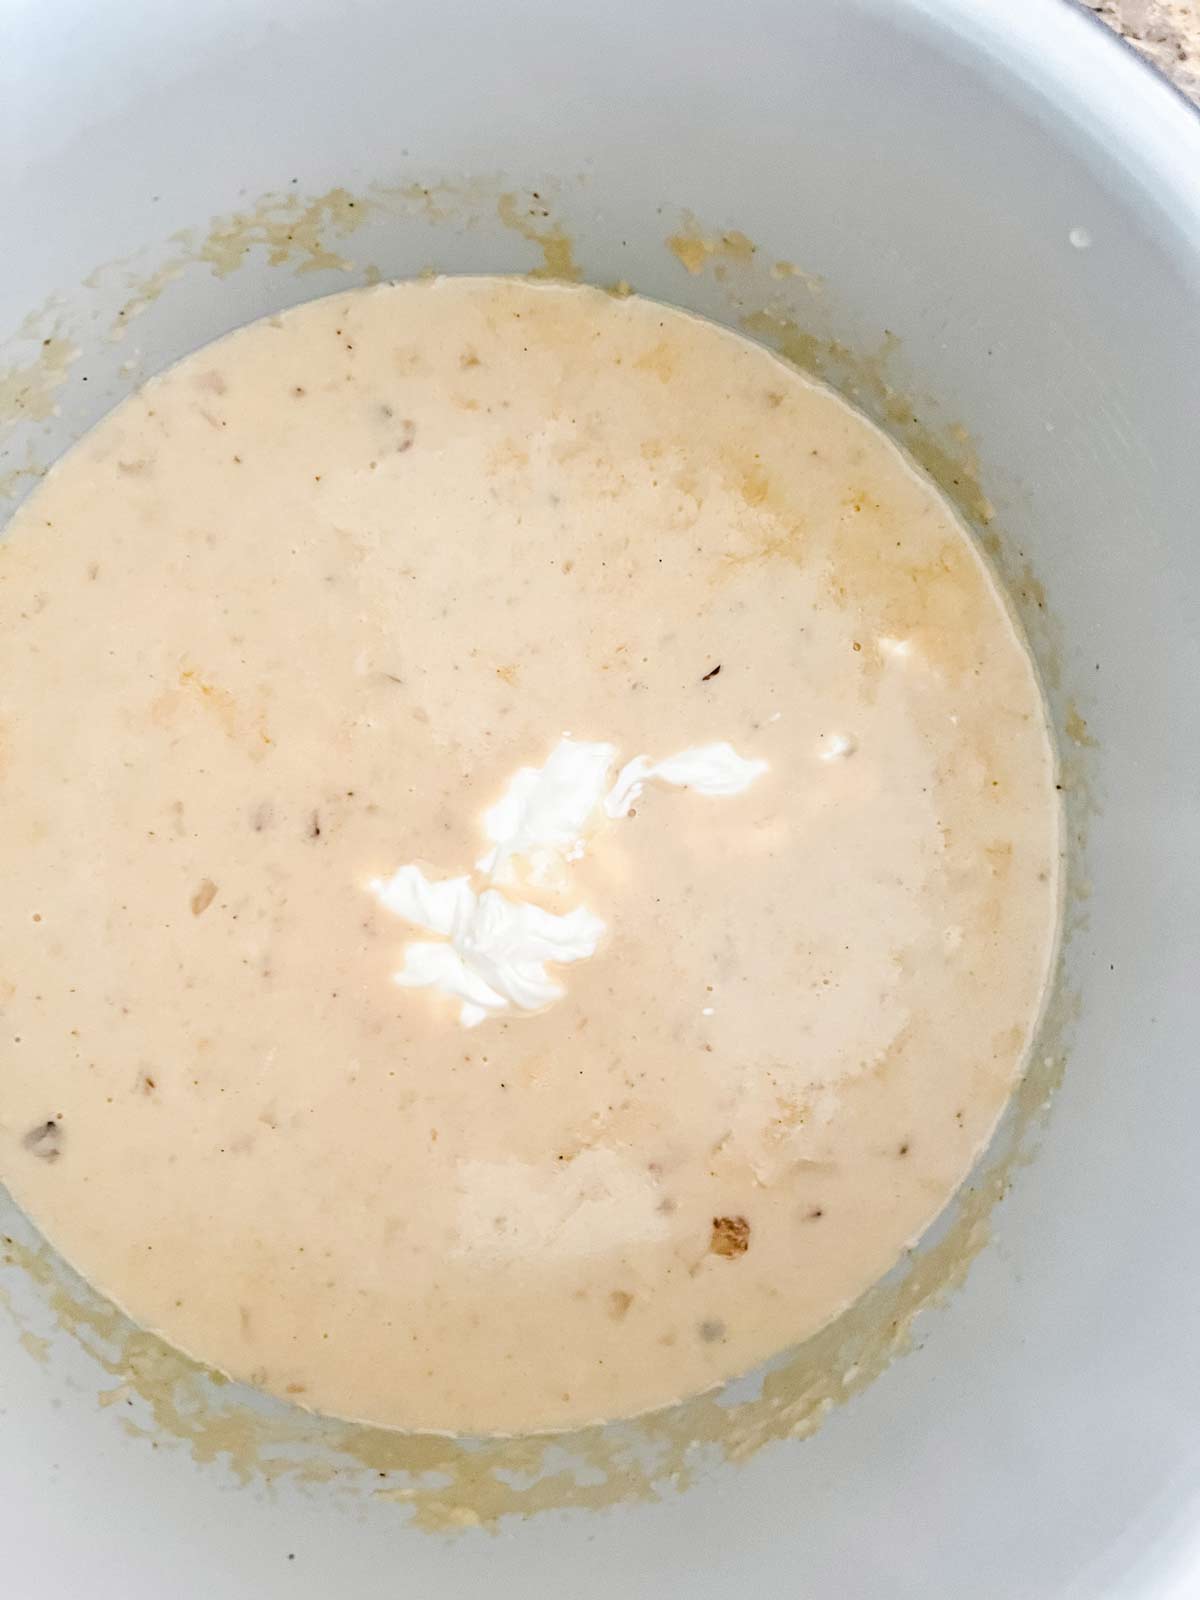 Sour cream being added to potato soup.